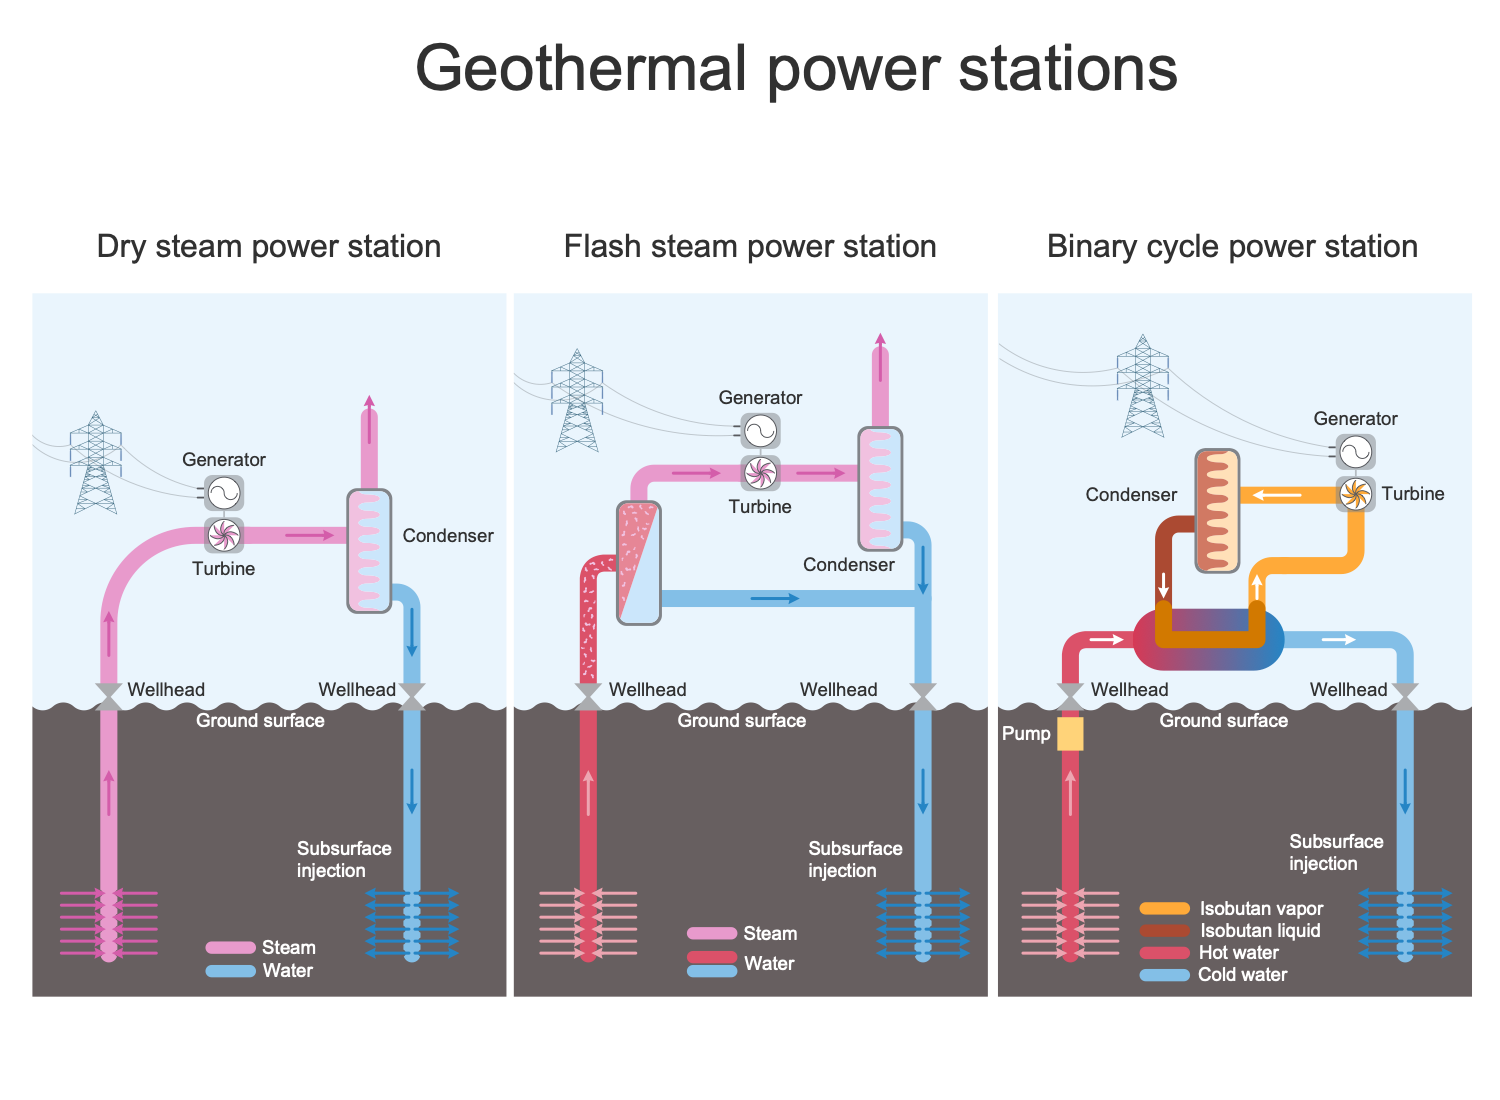 Geothermal Power Stations